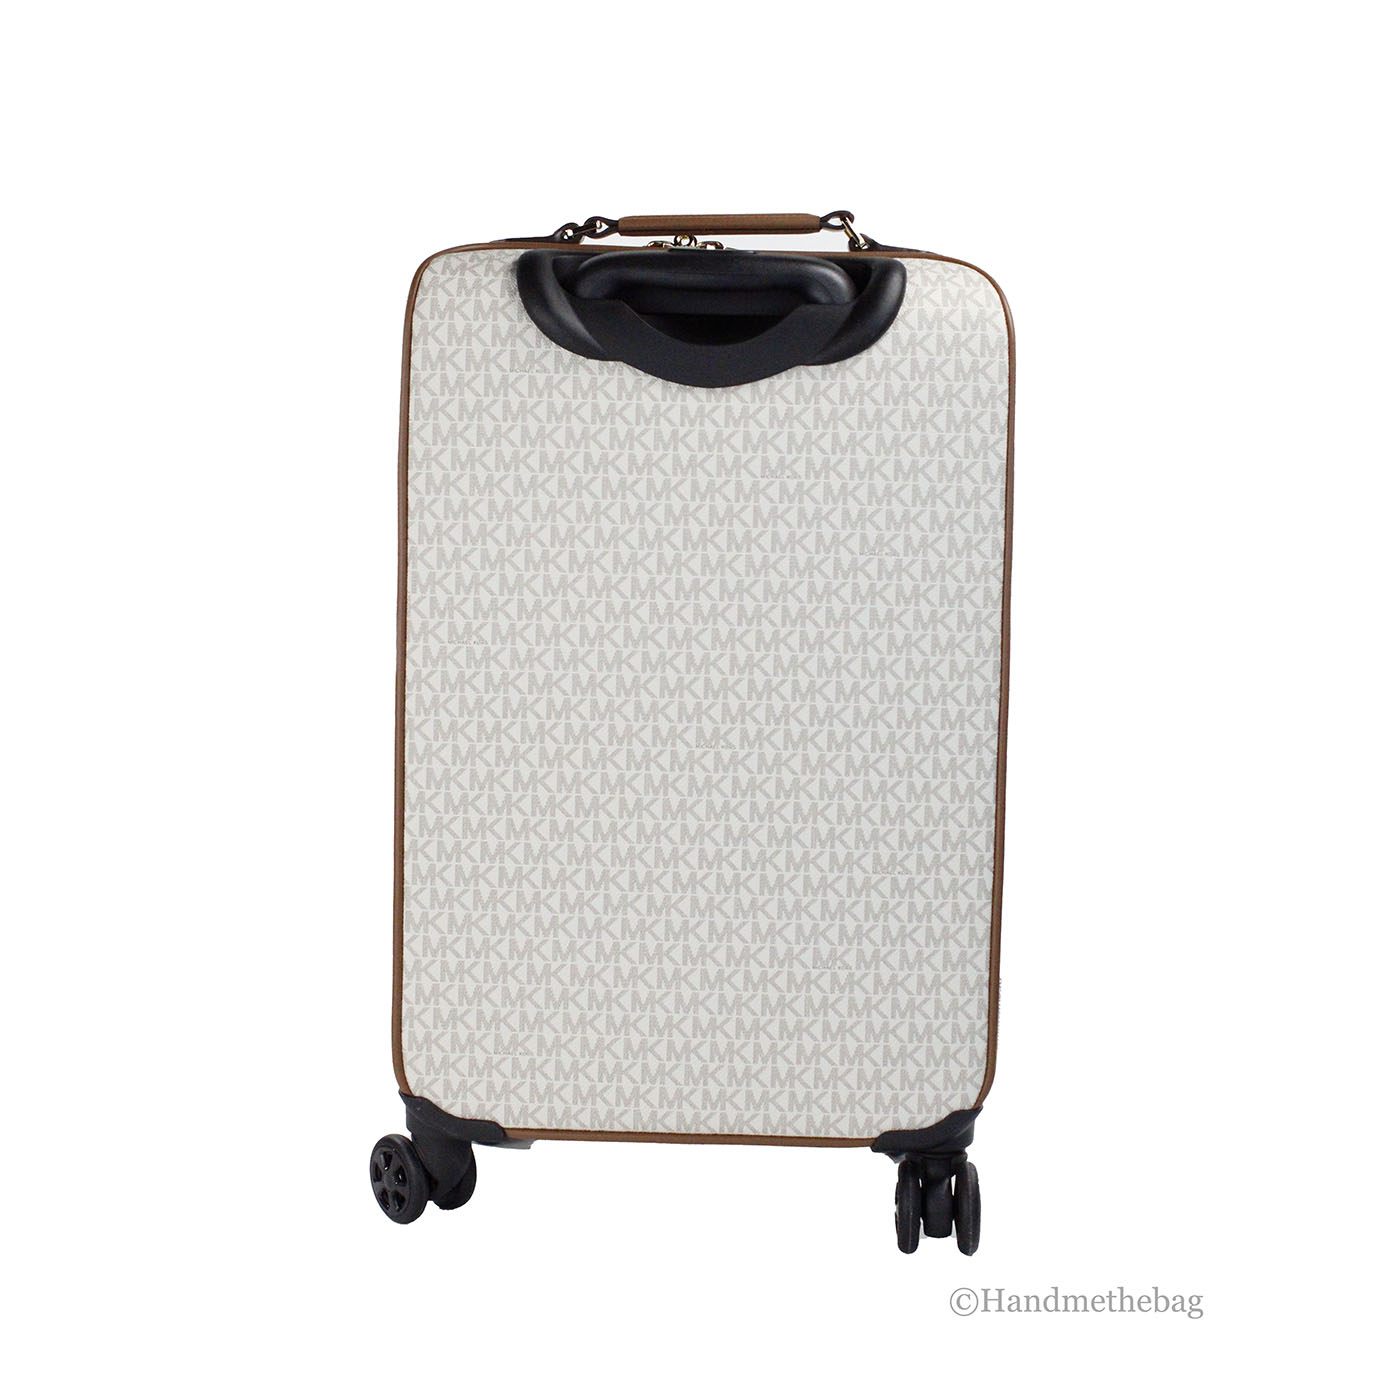 Michael Kors Travel Small Vanilla Trolley Rolling Suitcase